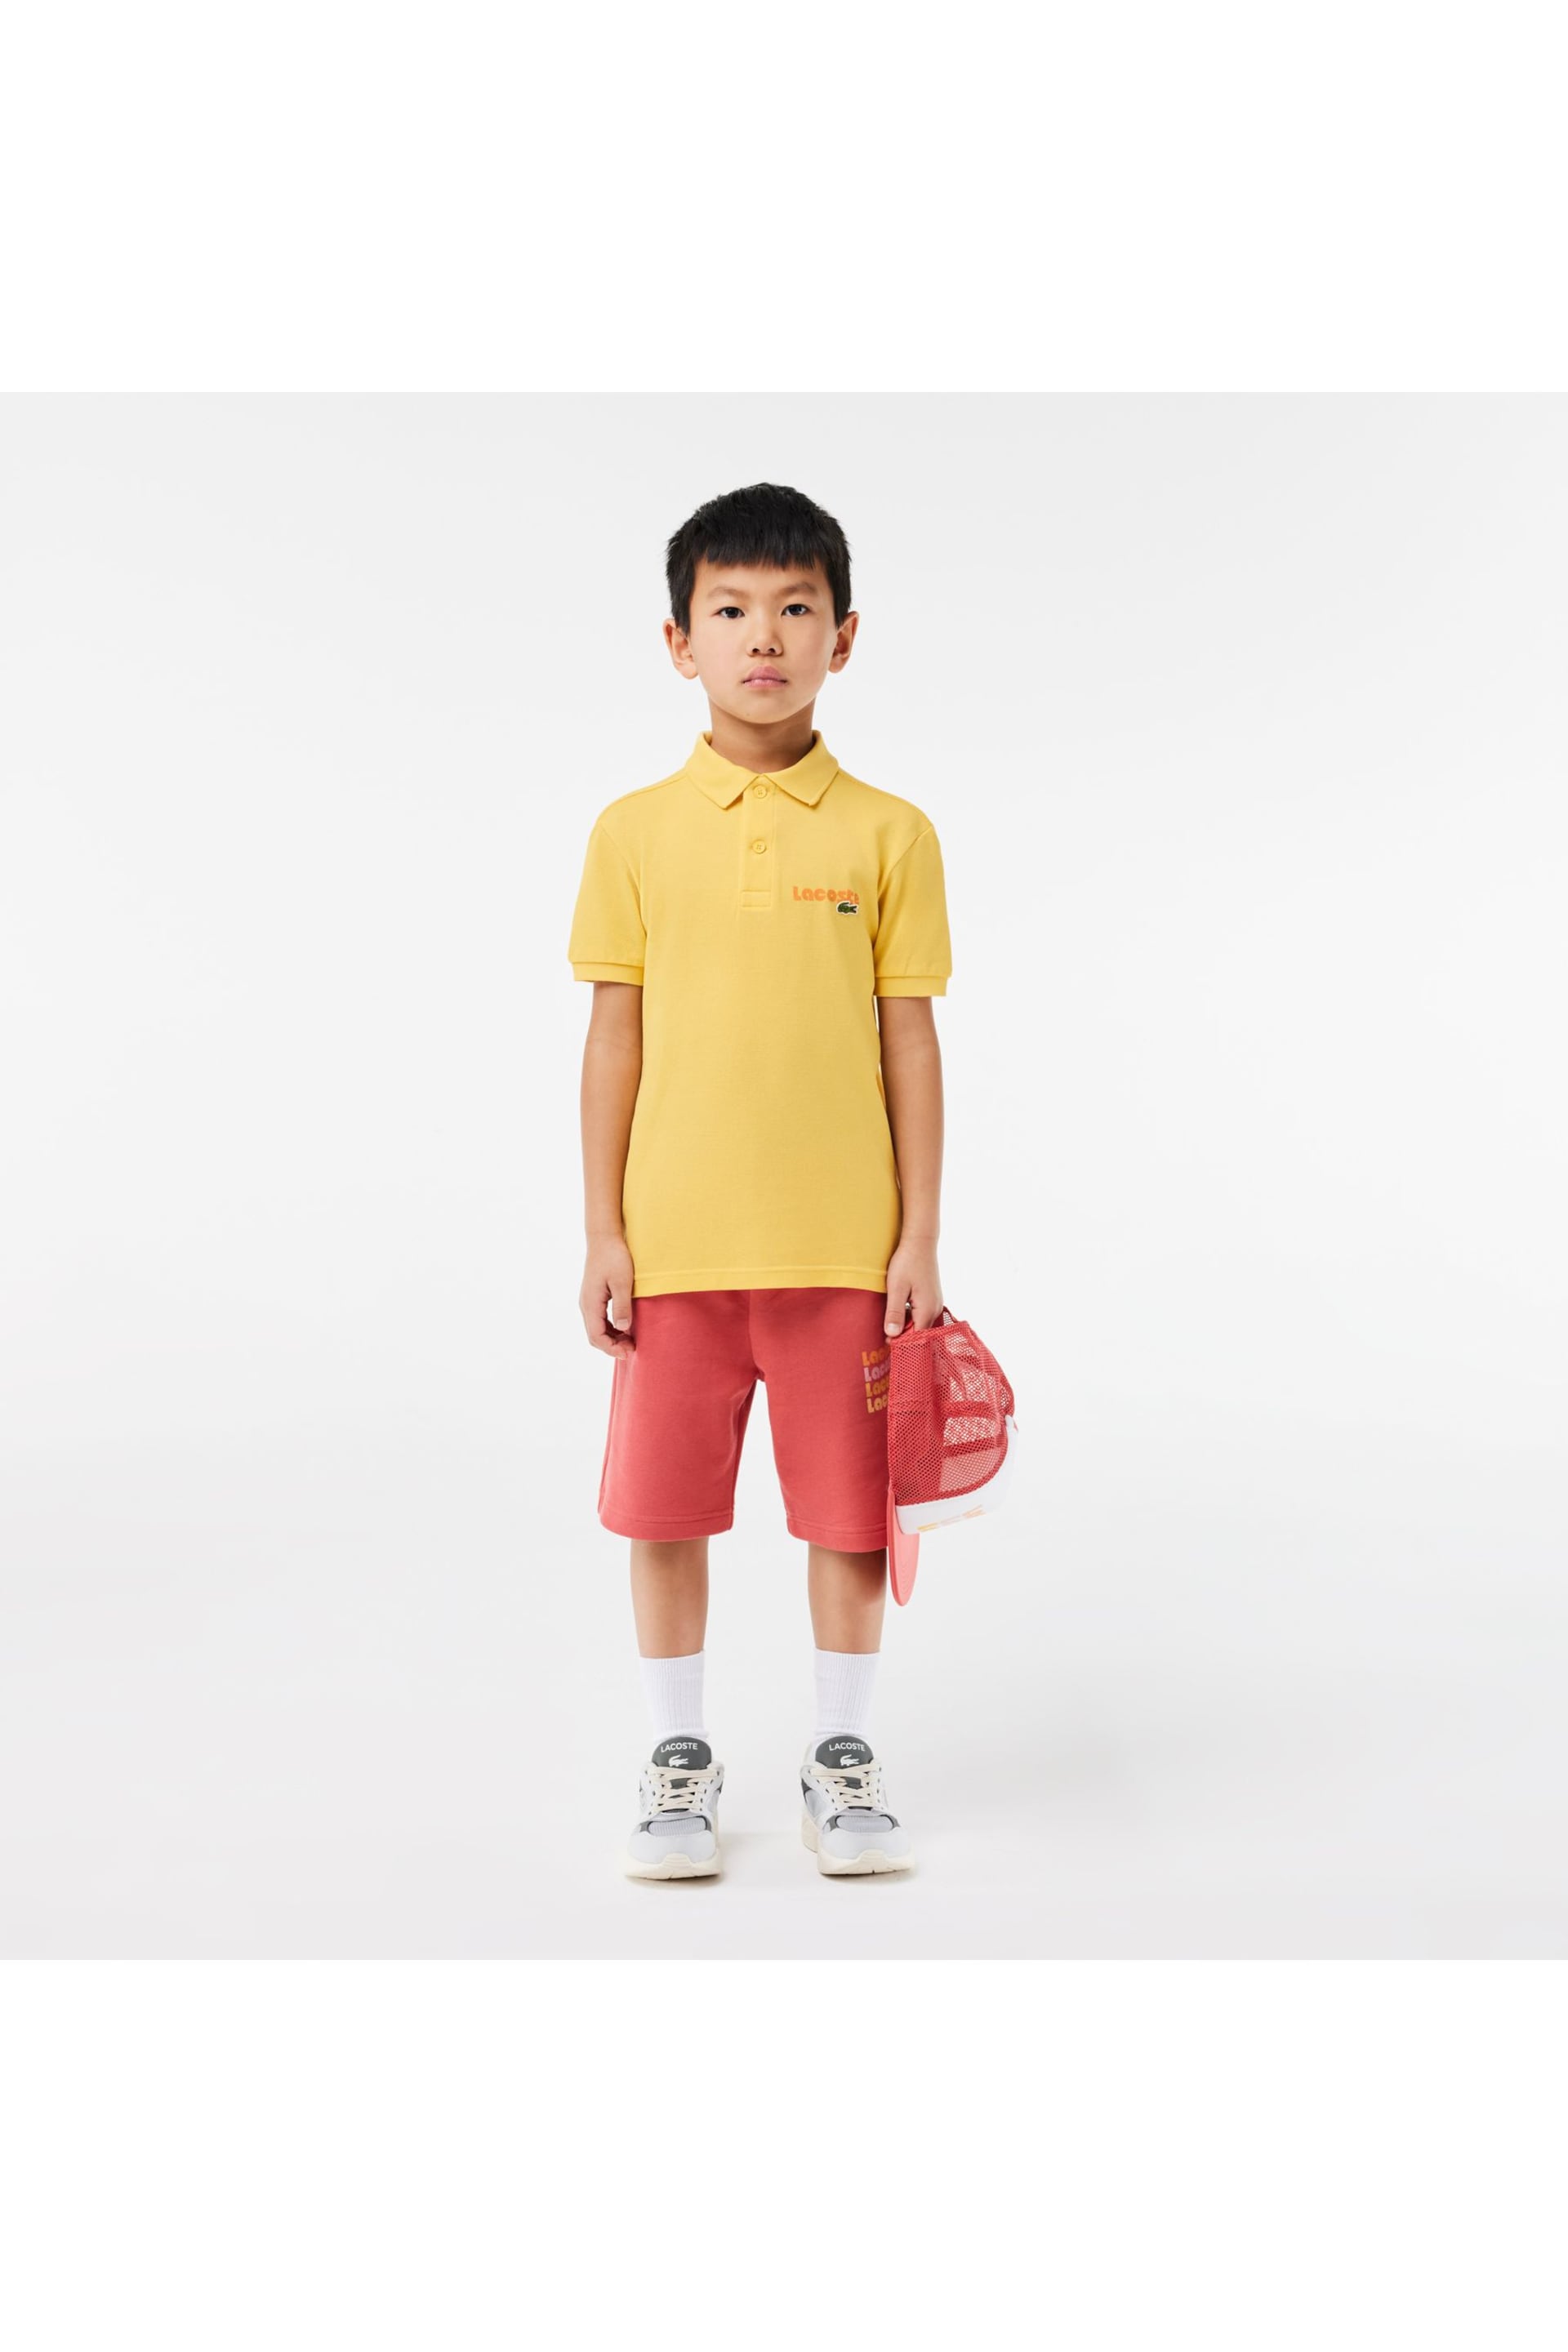 Lacoste Children's Updated Logo Polo Shirt - Image 3 of 7